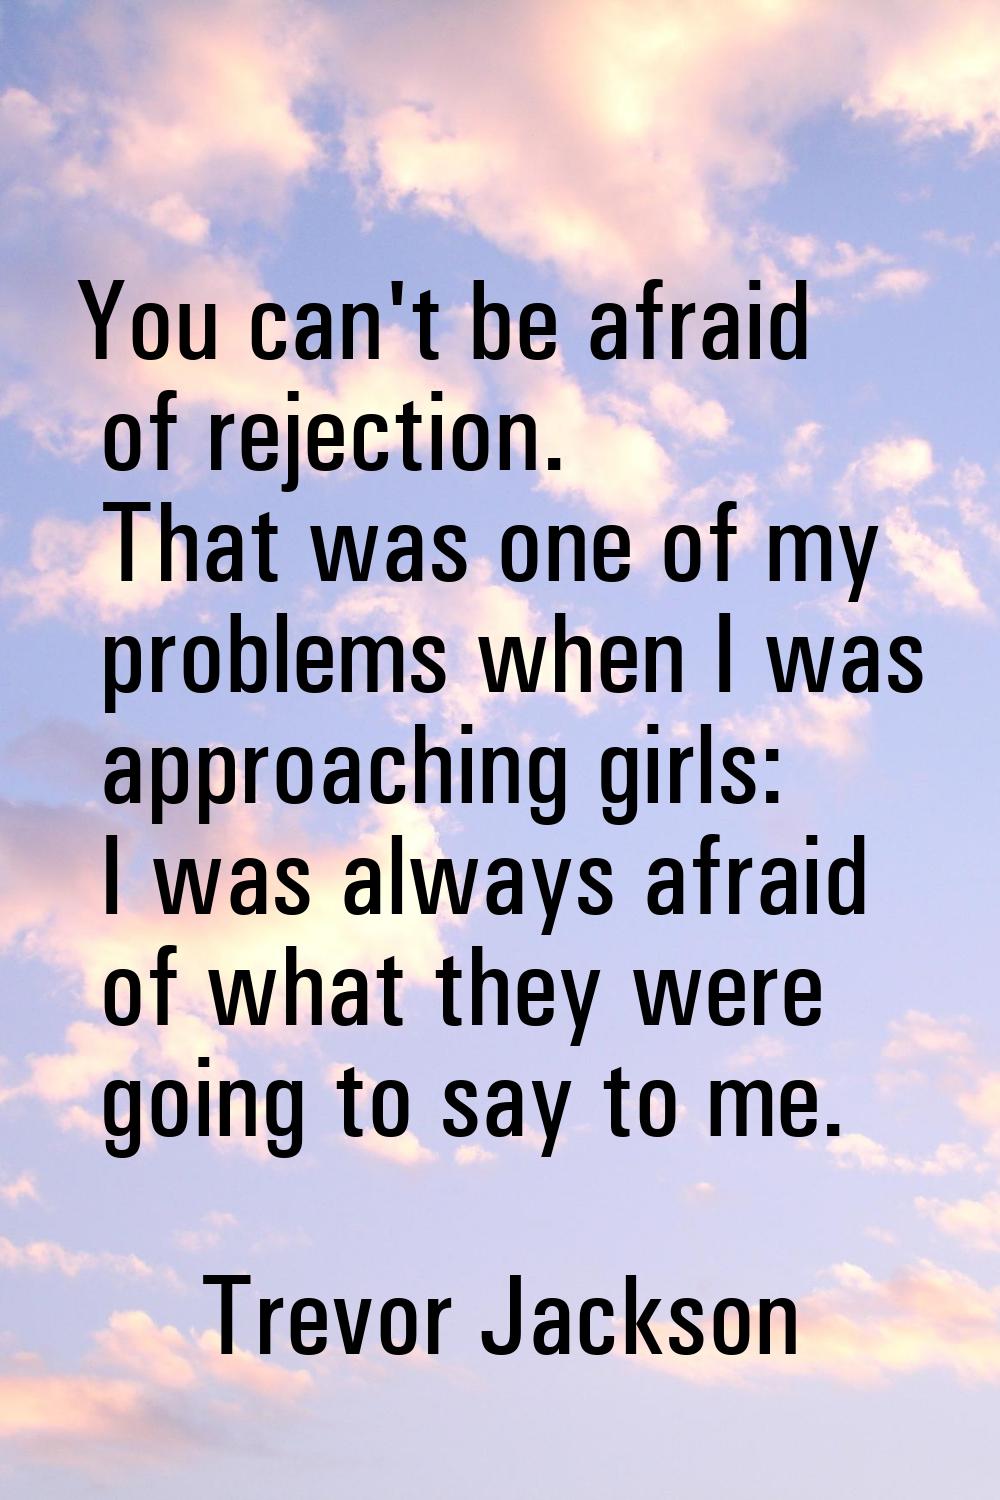 You can't be afraid of rejection. That was one of my problems when I was approaching girls: I was a